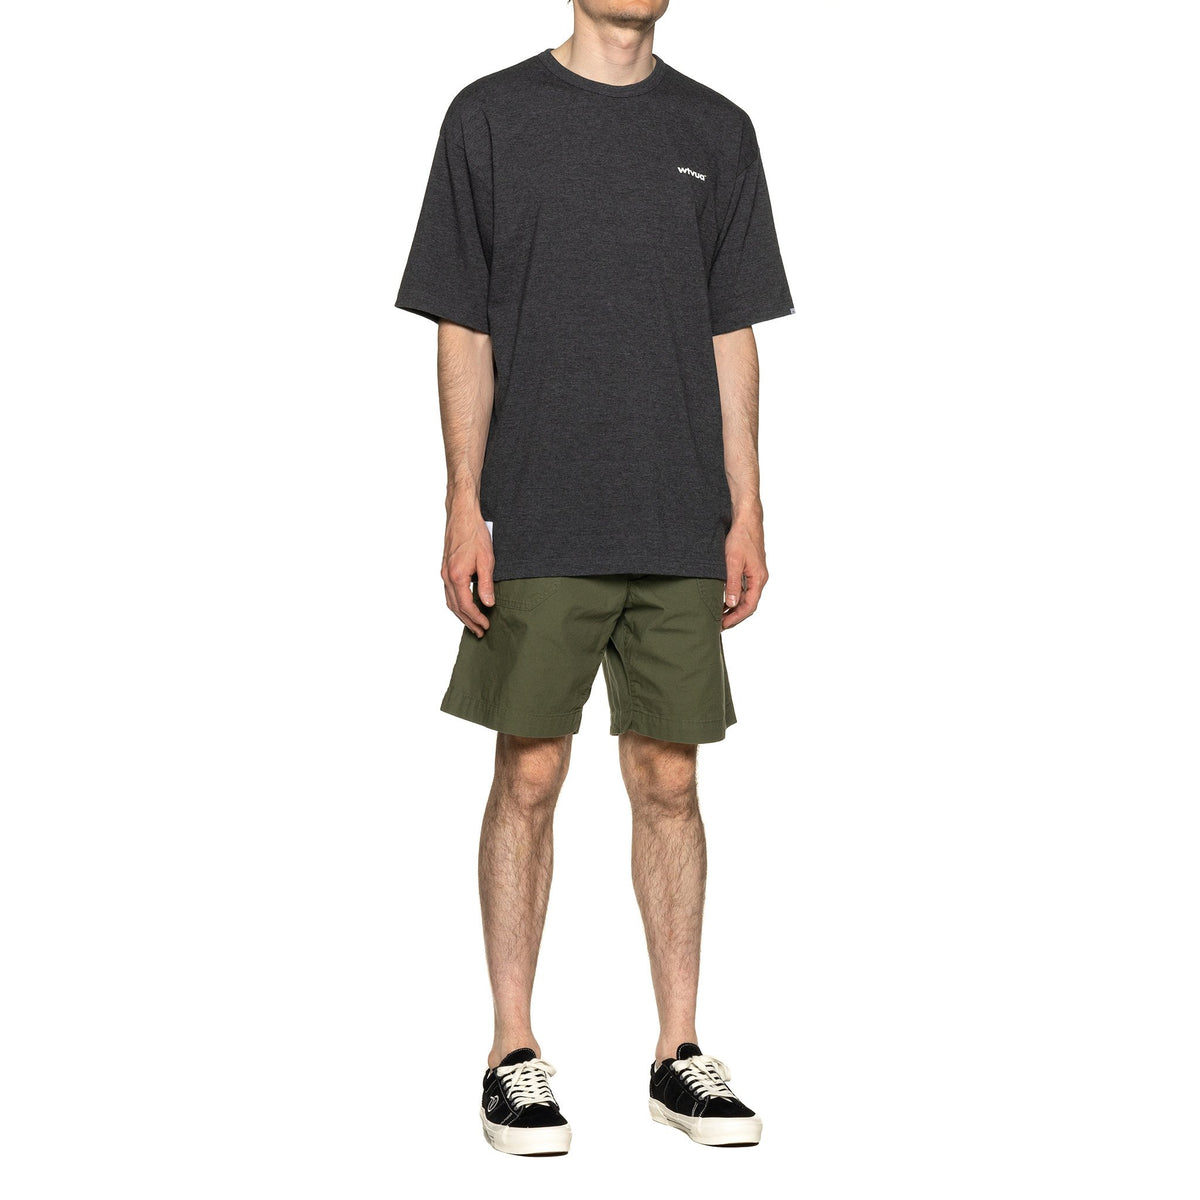 WTAPS 19S/S BUDS SHORTS SHORTS. COTTON. RIPSTOP [ 191GWDT-PTM02 ]